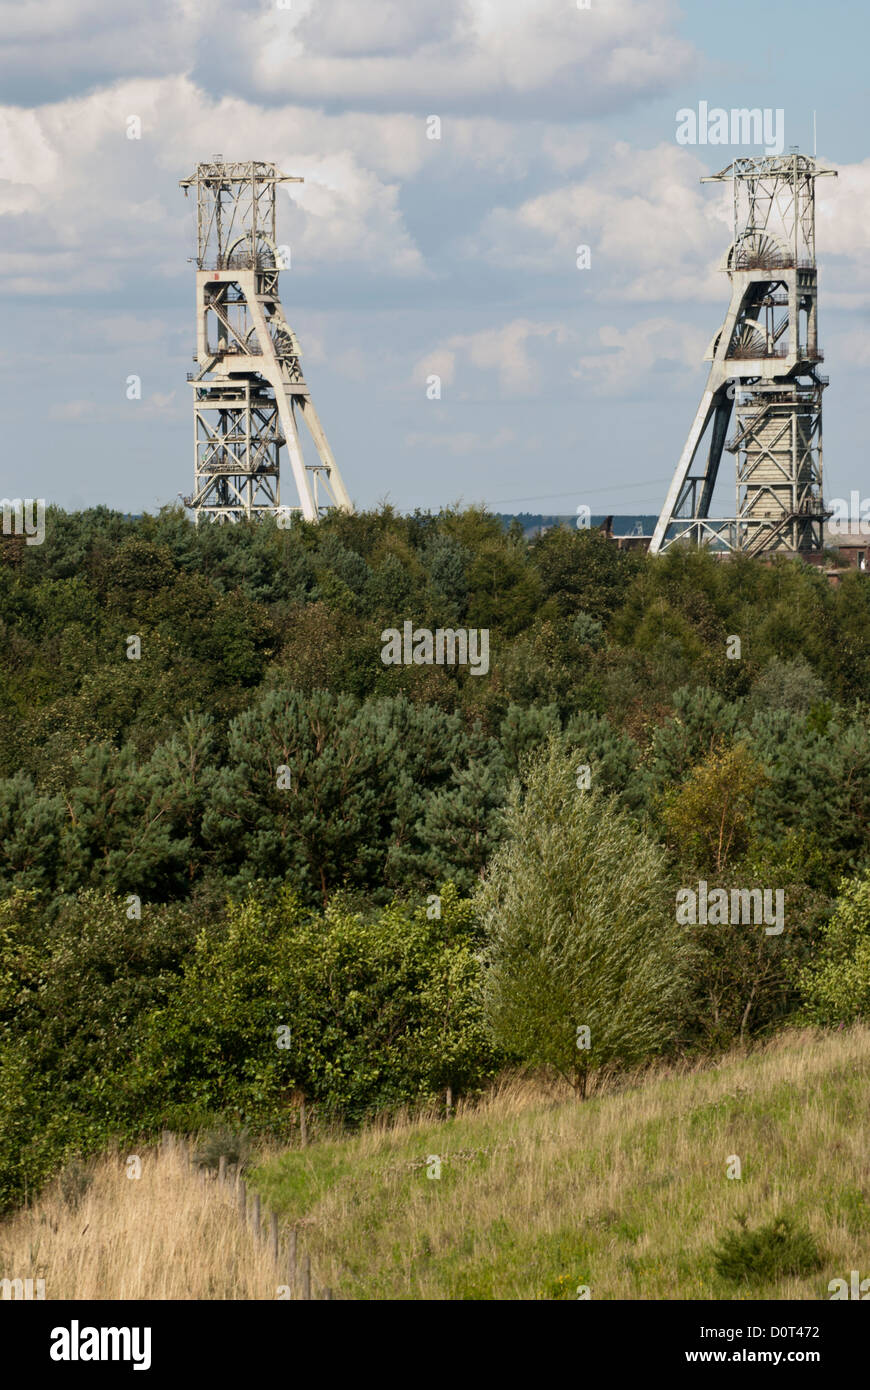 The view from Vicar Water Country Park looking out to Clipstone Colliery Headstocks, Clipstone, Nottinghamshire, UK. Stock Photo